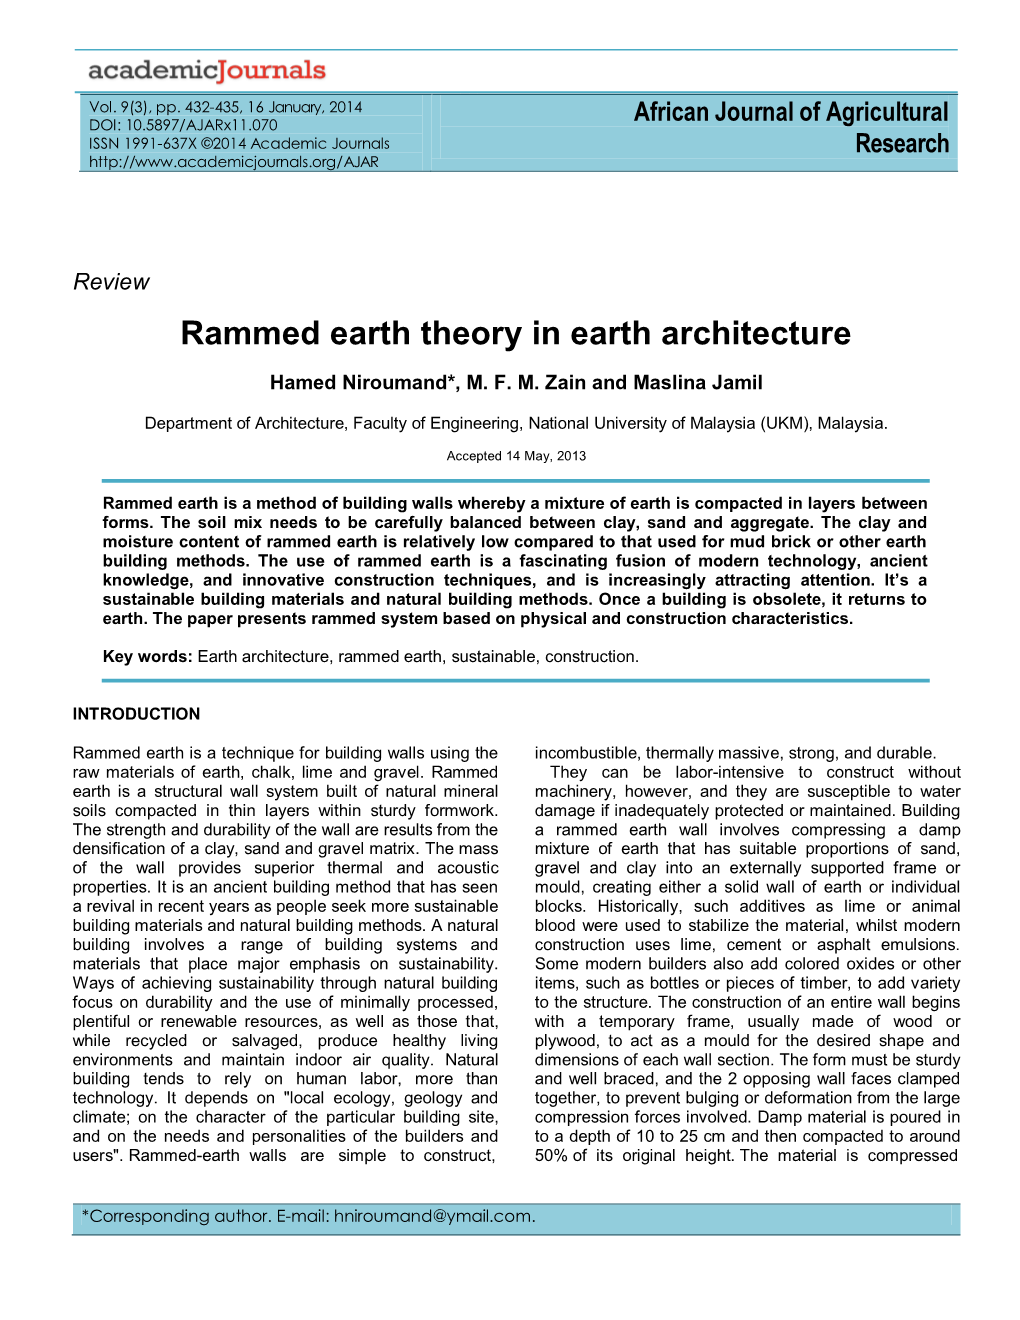 Rammed Earth Theory in Earth Architecture